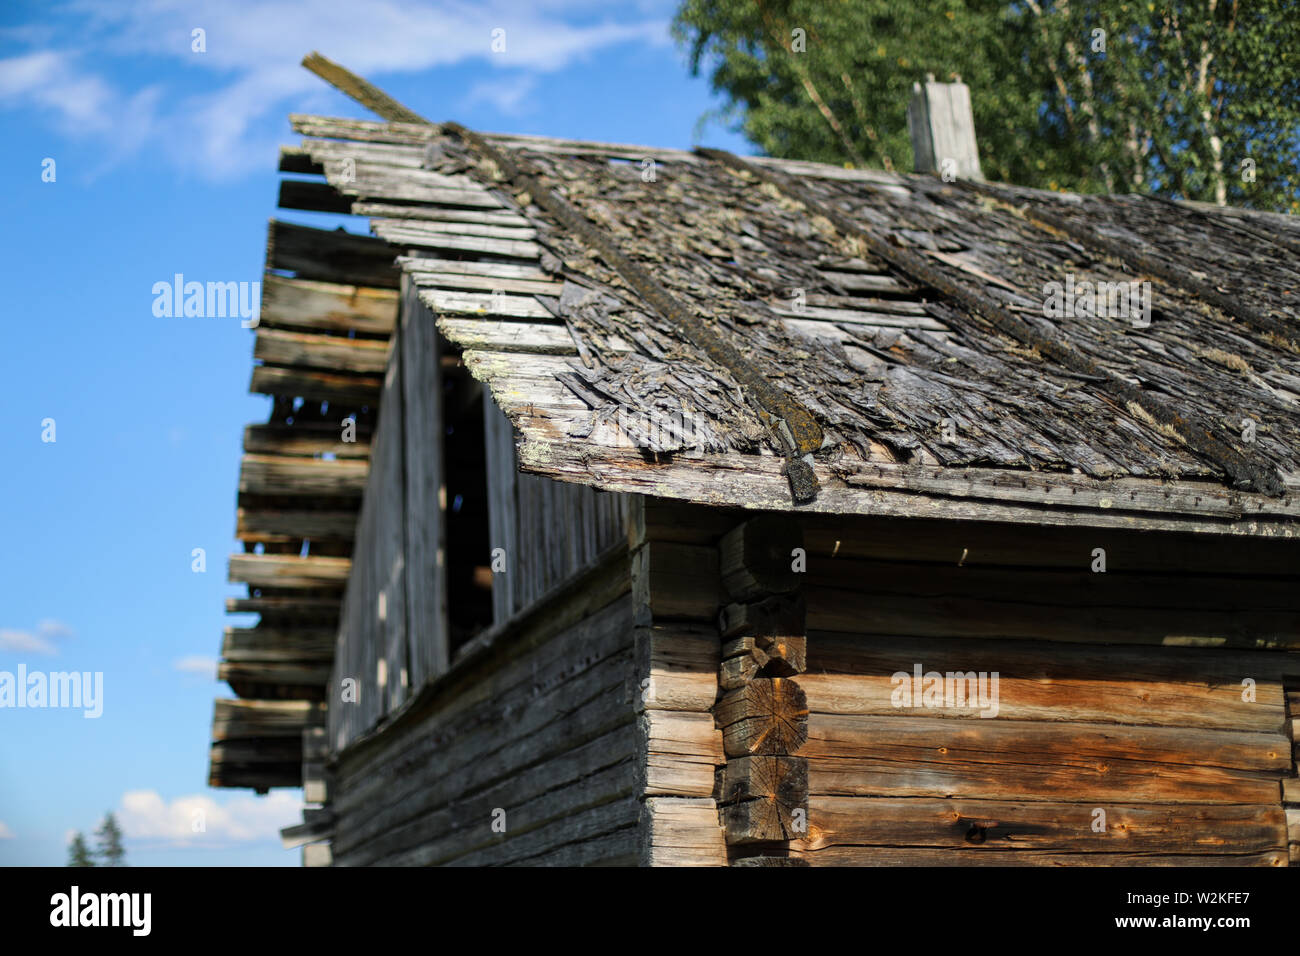 Wood shingle roof of an old weathered log barn in disrepair at abandoned farmstead in Ylöjärvi, Finland Stock Photo